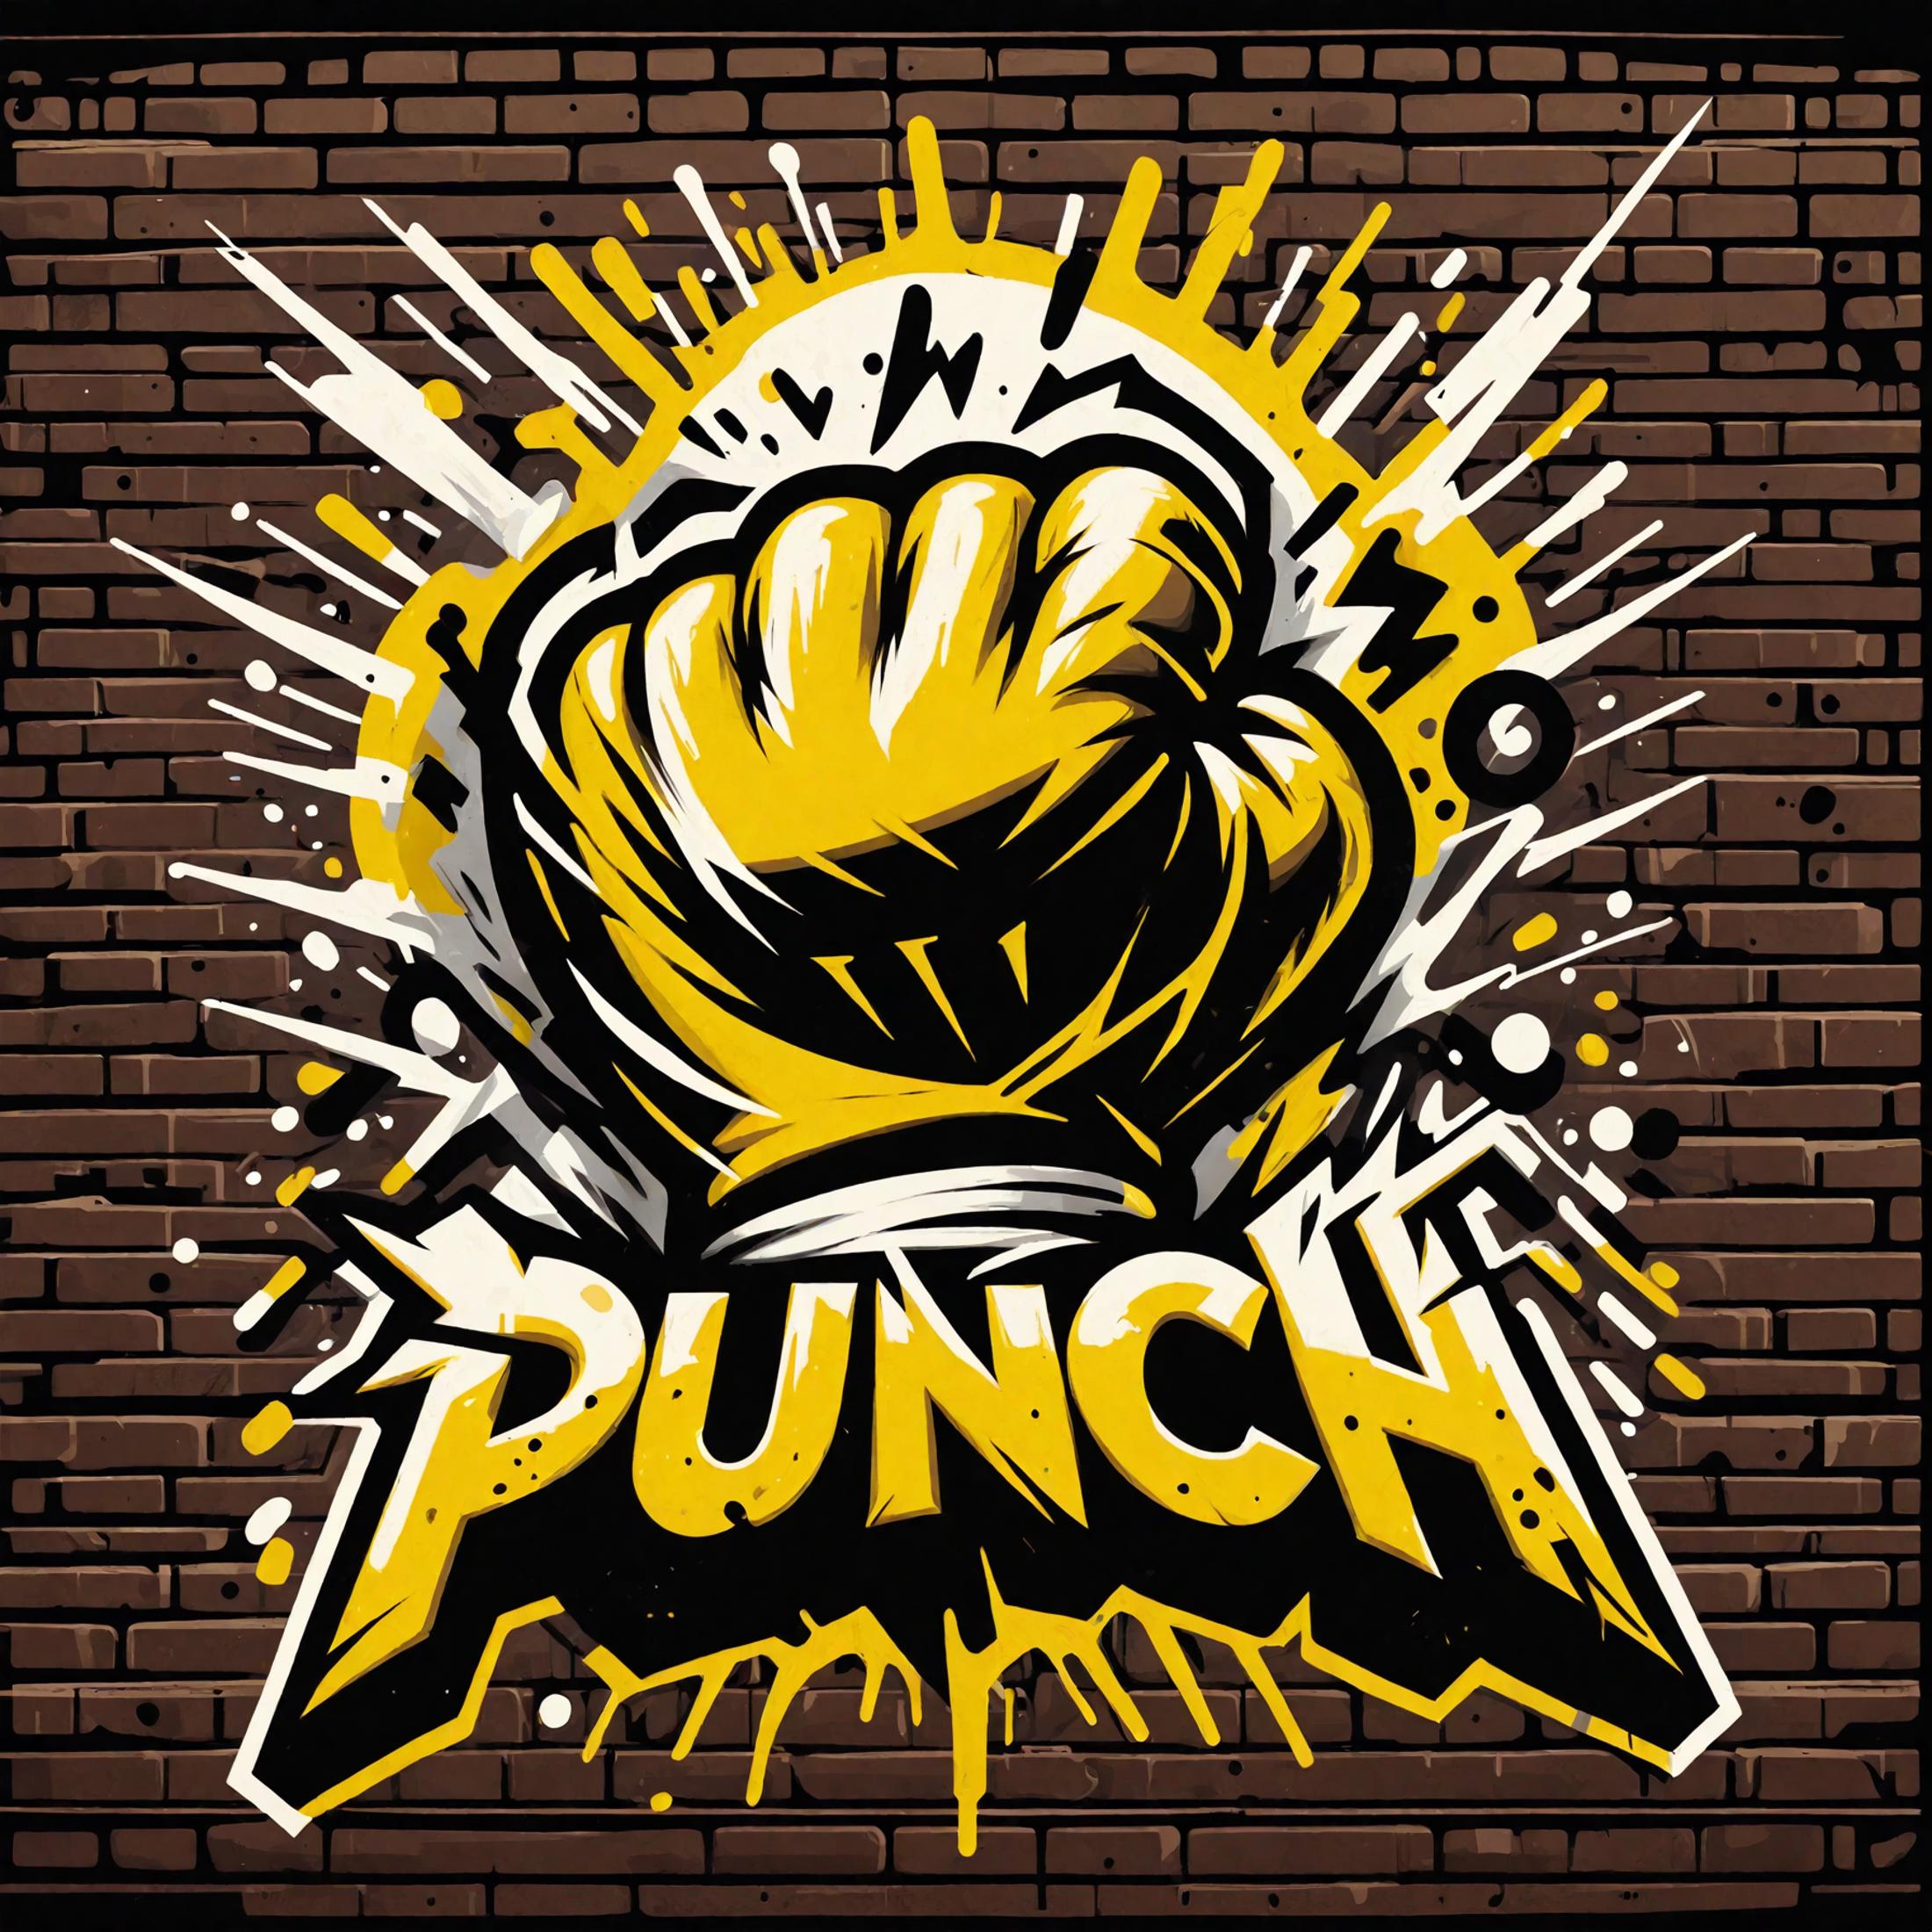 A yellow and black graphic of a fist with the word "Punch" written on it.